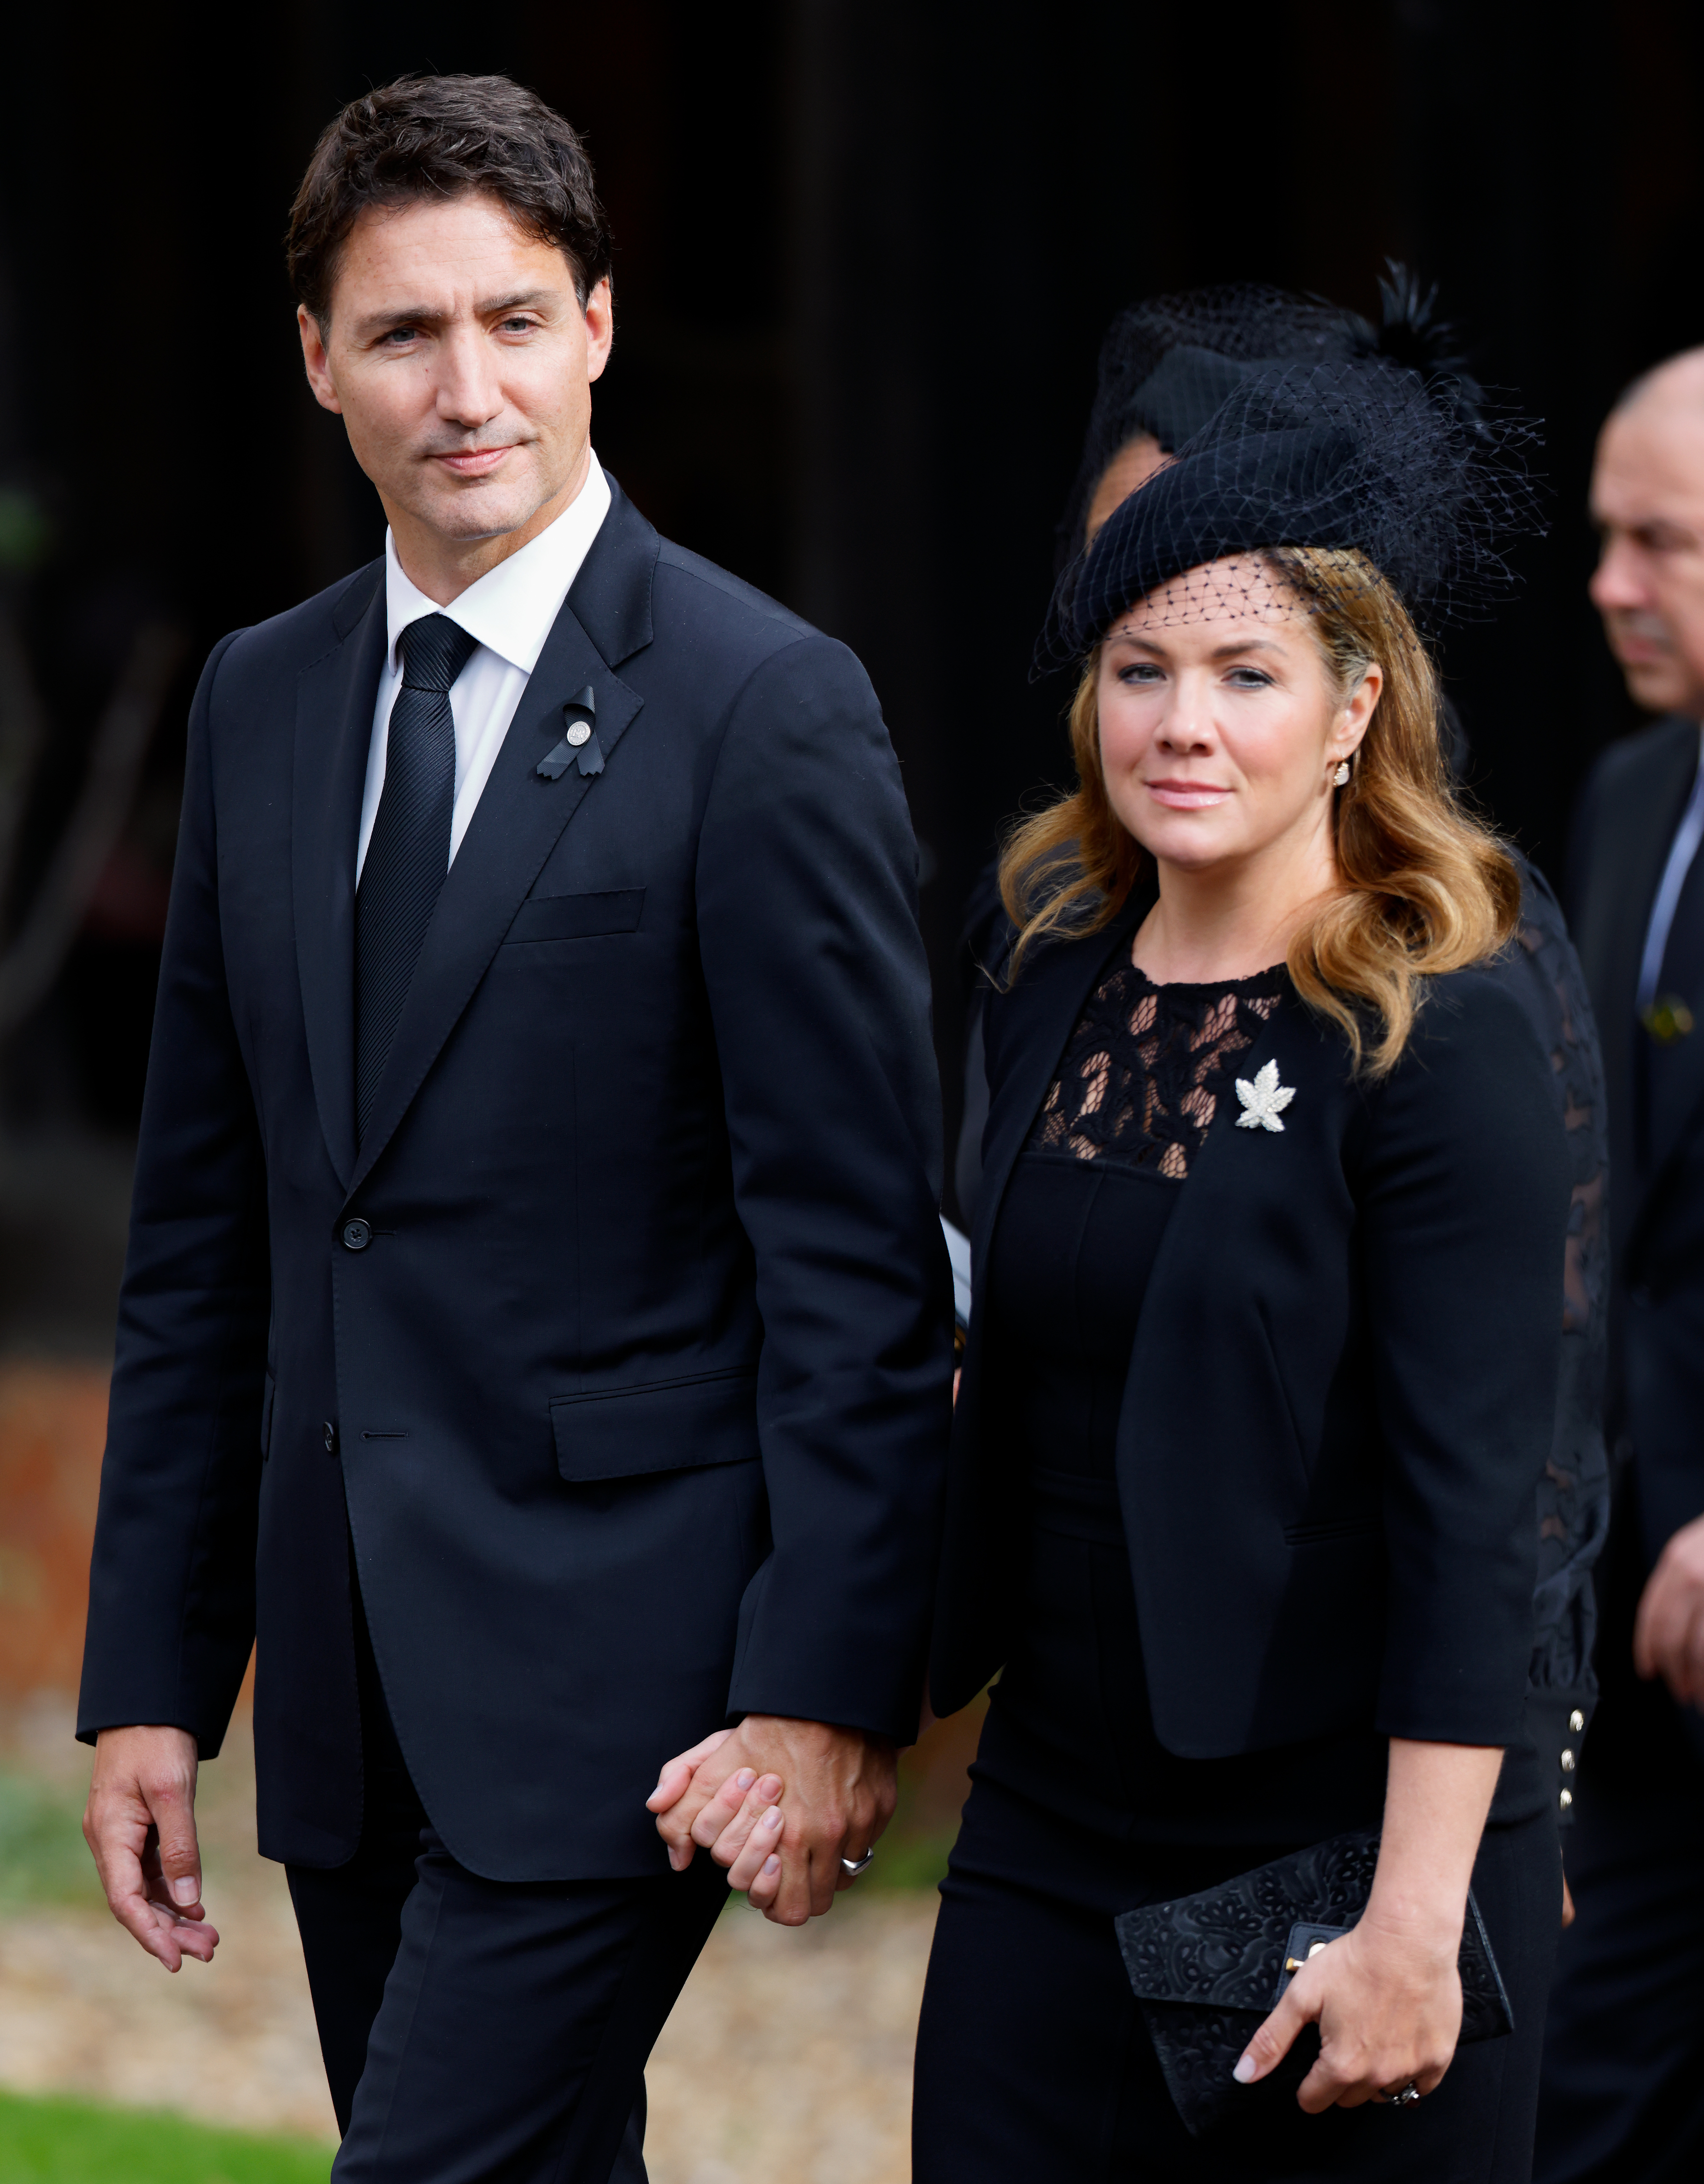 closeup of the two arriving to an event holding hands